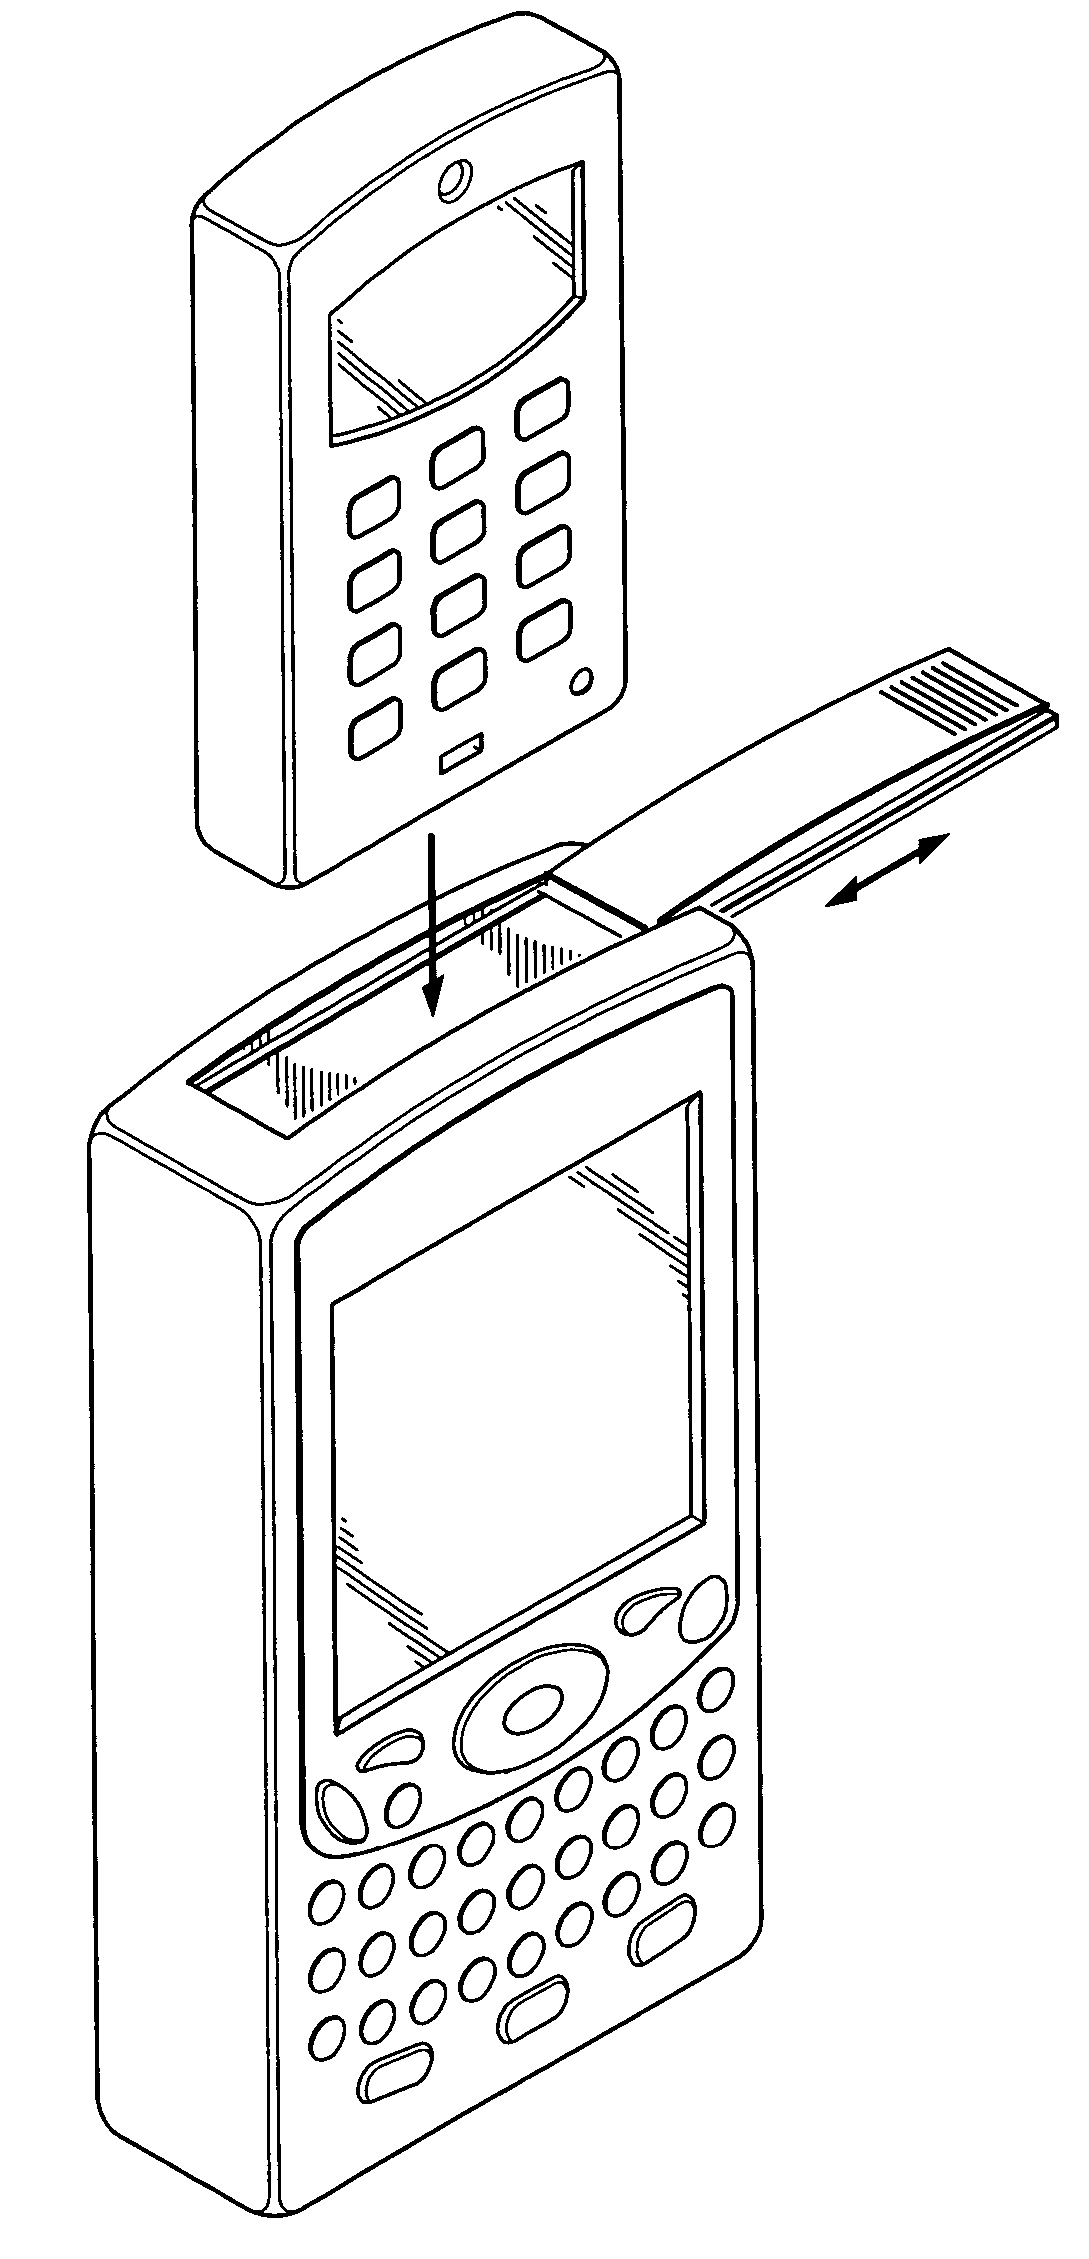 Mobile handheld electronic device with a removable cellphone